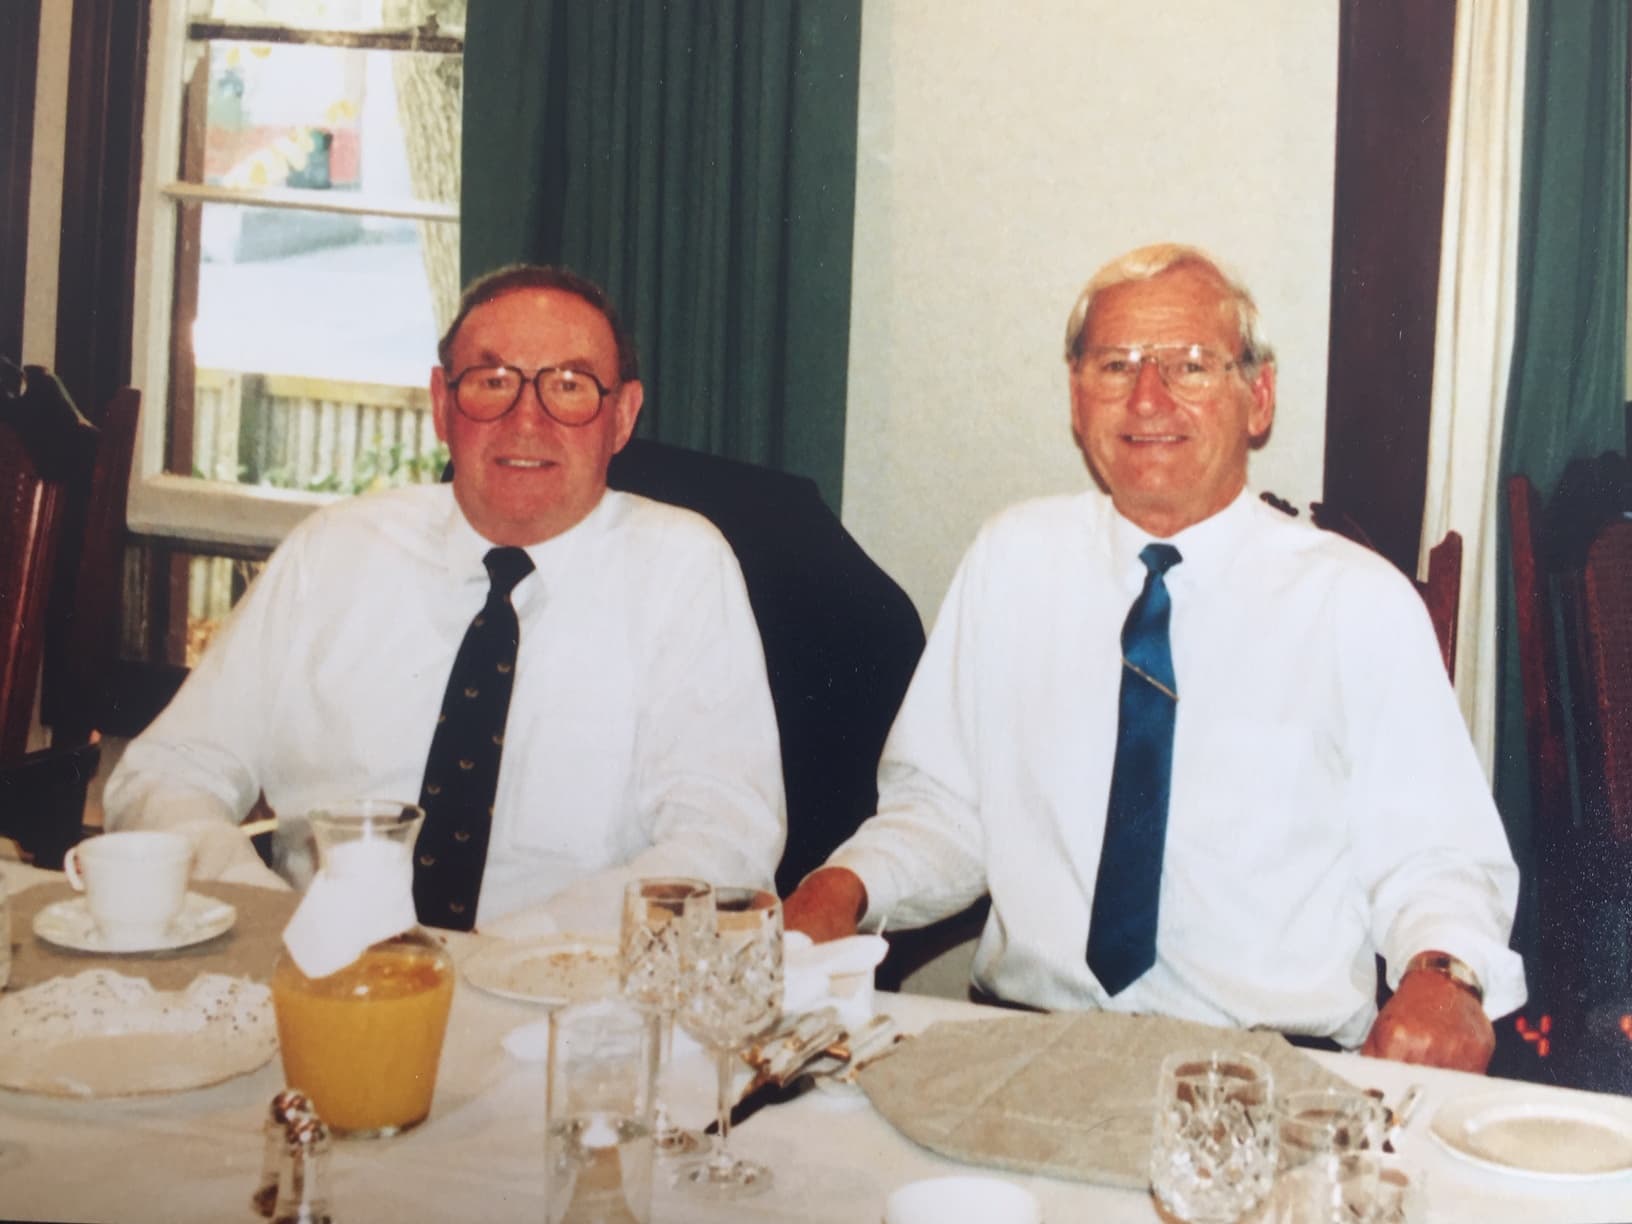 Two men, Dick Edwards and Des Hardy, sitting at a table.